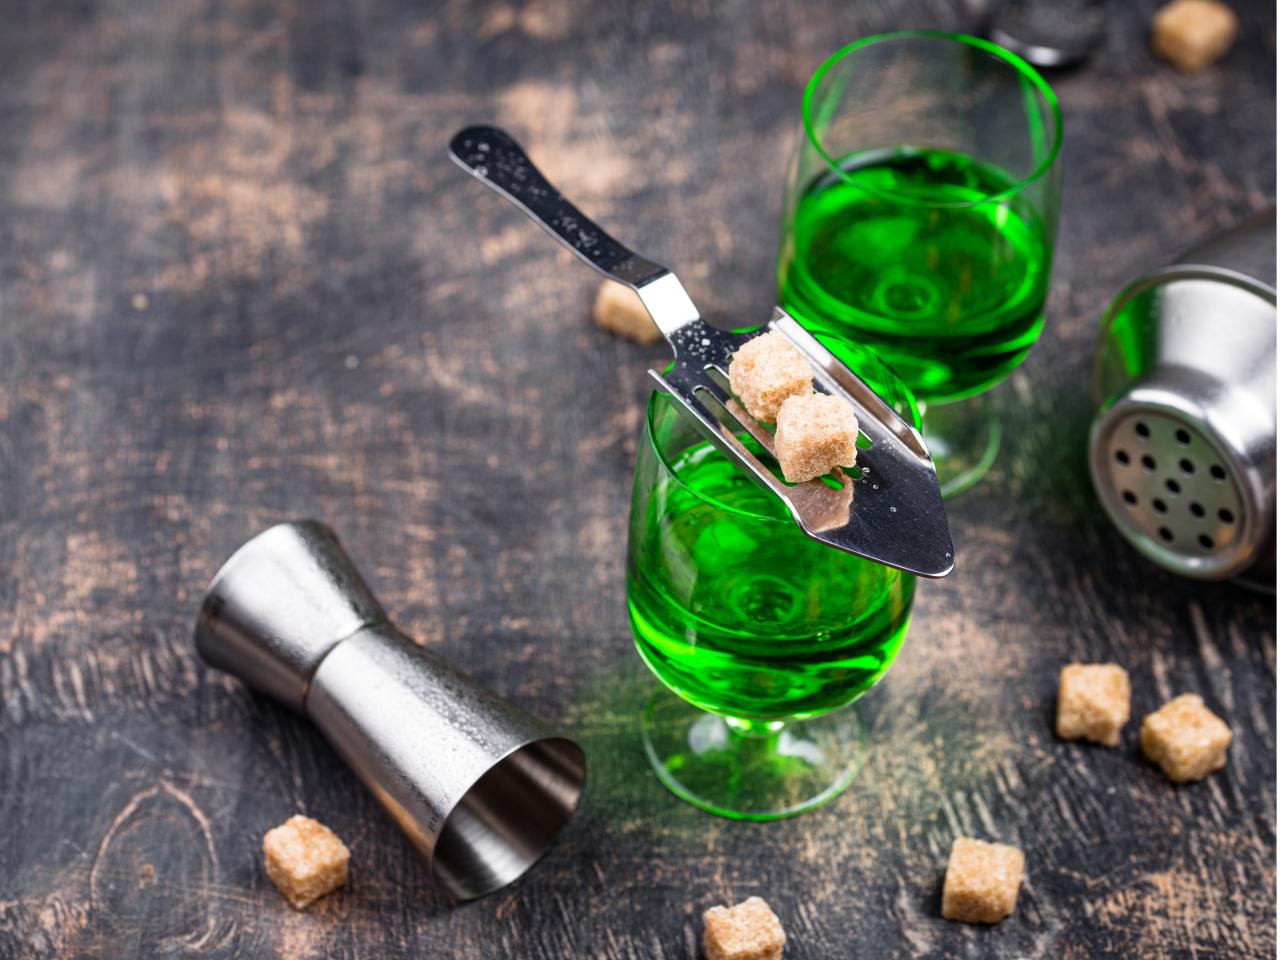 The best absinthes for a green drink that will make you paint the town red  - The Manual